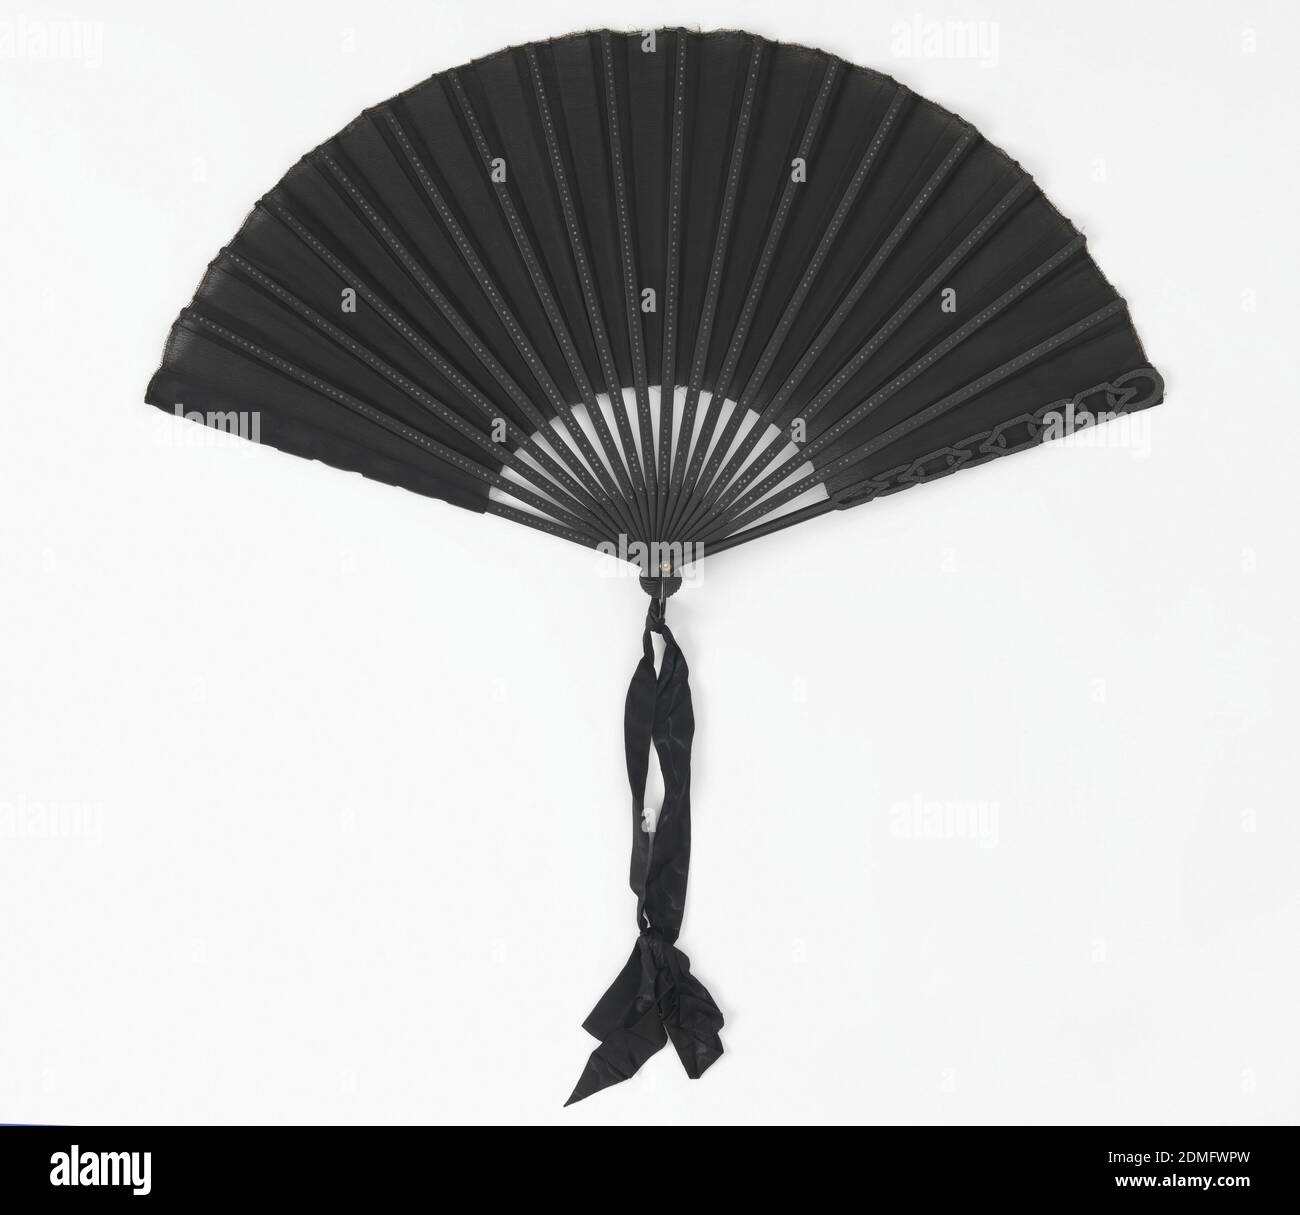 Pleated mourning fan, Duvelleroy, (Paris, France, founded 1827), Silk crepe leaf, painted wood guards and sticks inlaid with black spangles, guards cut à jour, horn washer and metal loop at the rivet, silk ribbon, Pleated mourning fan. Black silk crepe leaf. Black painted wood guards and sticks are inlaid with round black spangles. Guards cut à jour in a strapwork design of interlacing ovals and hexagons. Horn washer and metal loop at the rivet with black silk ribbon., Paris, France, 1885–90, costume & accessories, Pleated mourning fan Stock Photo